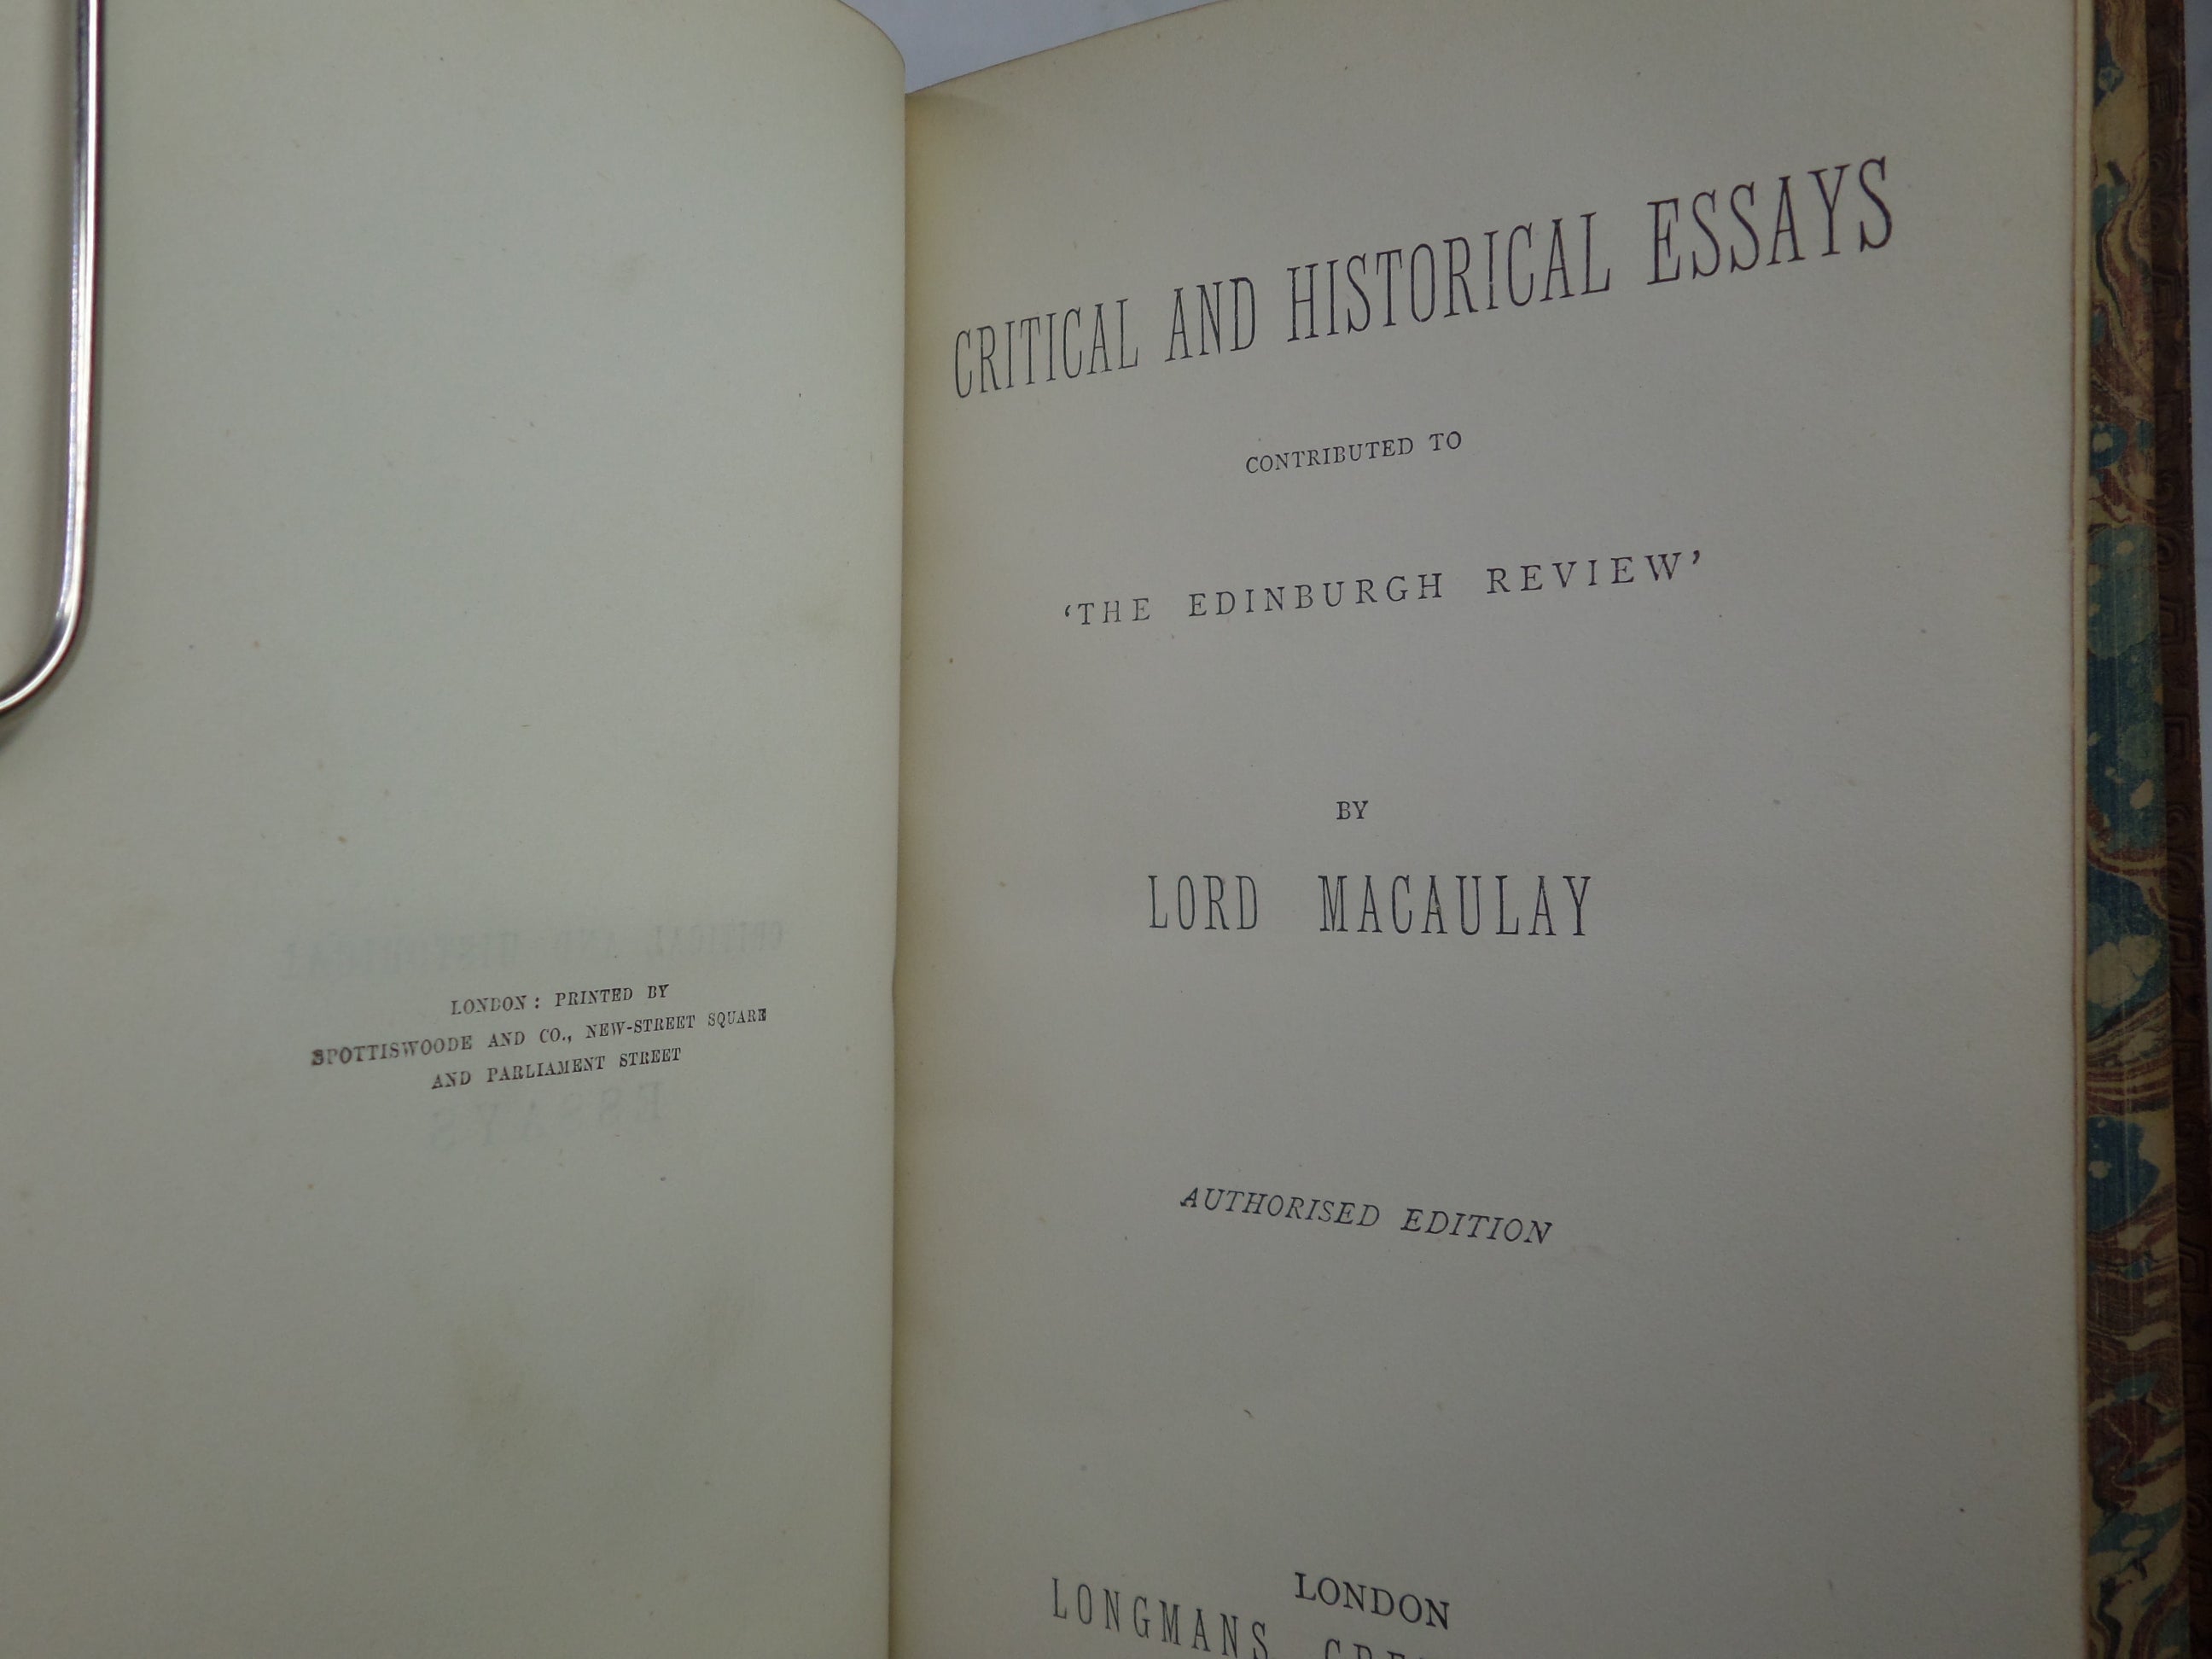 CRITICAL AND HISTORICAL ESSAYS BY LORD MACAULAY 1883 FINE RIVIERE BINDING